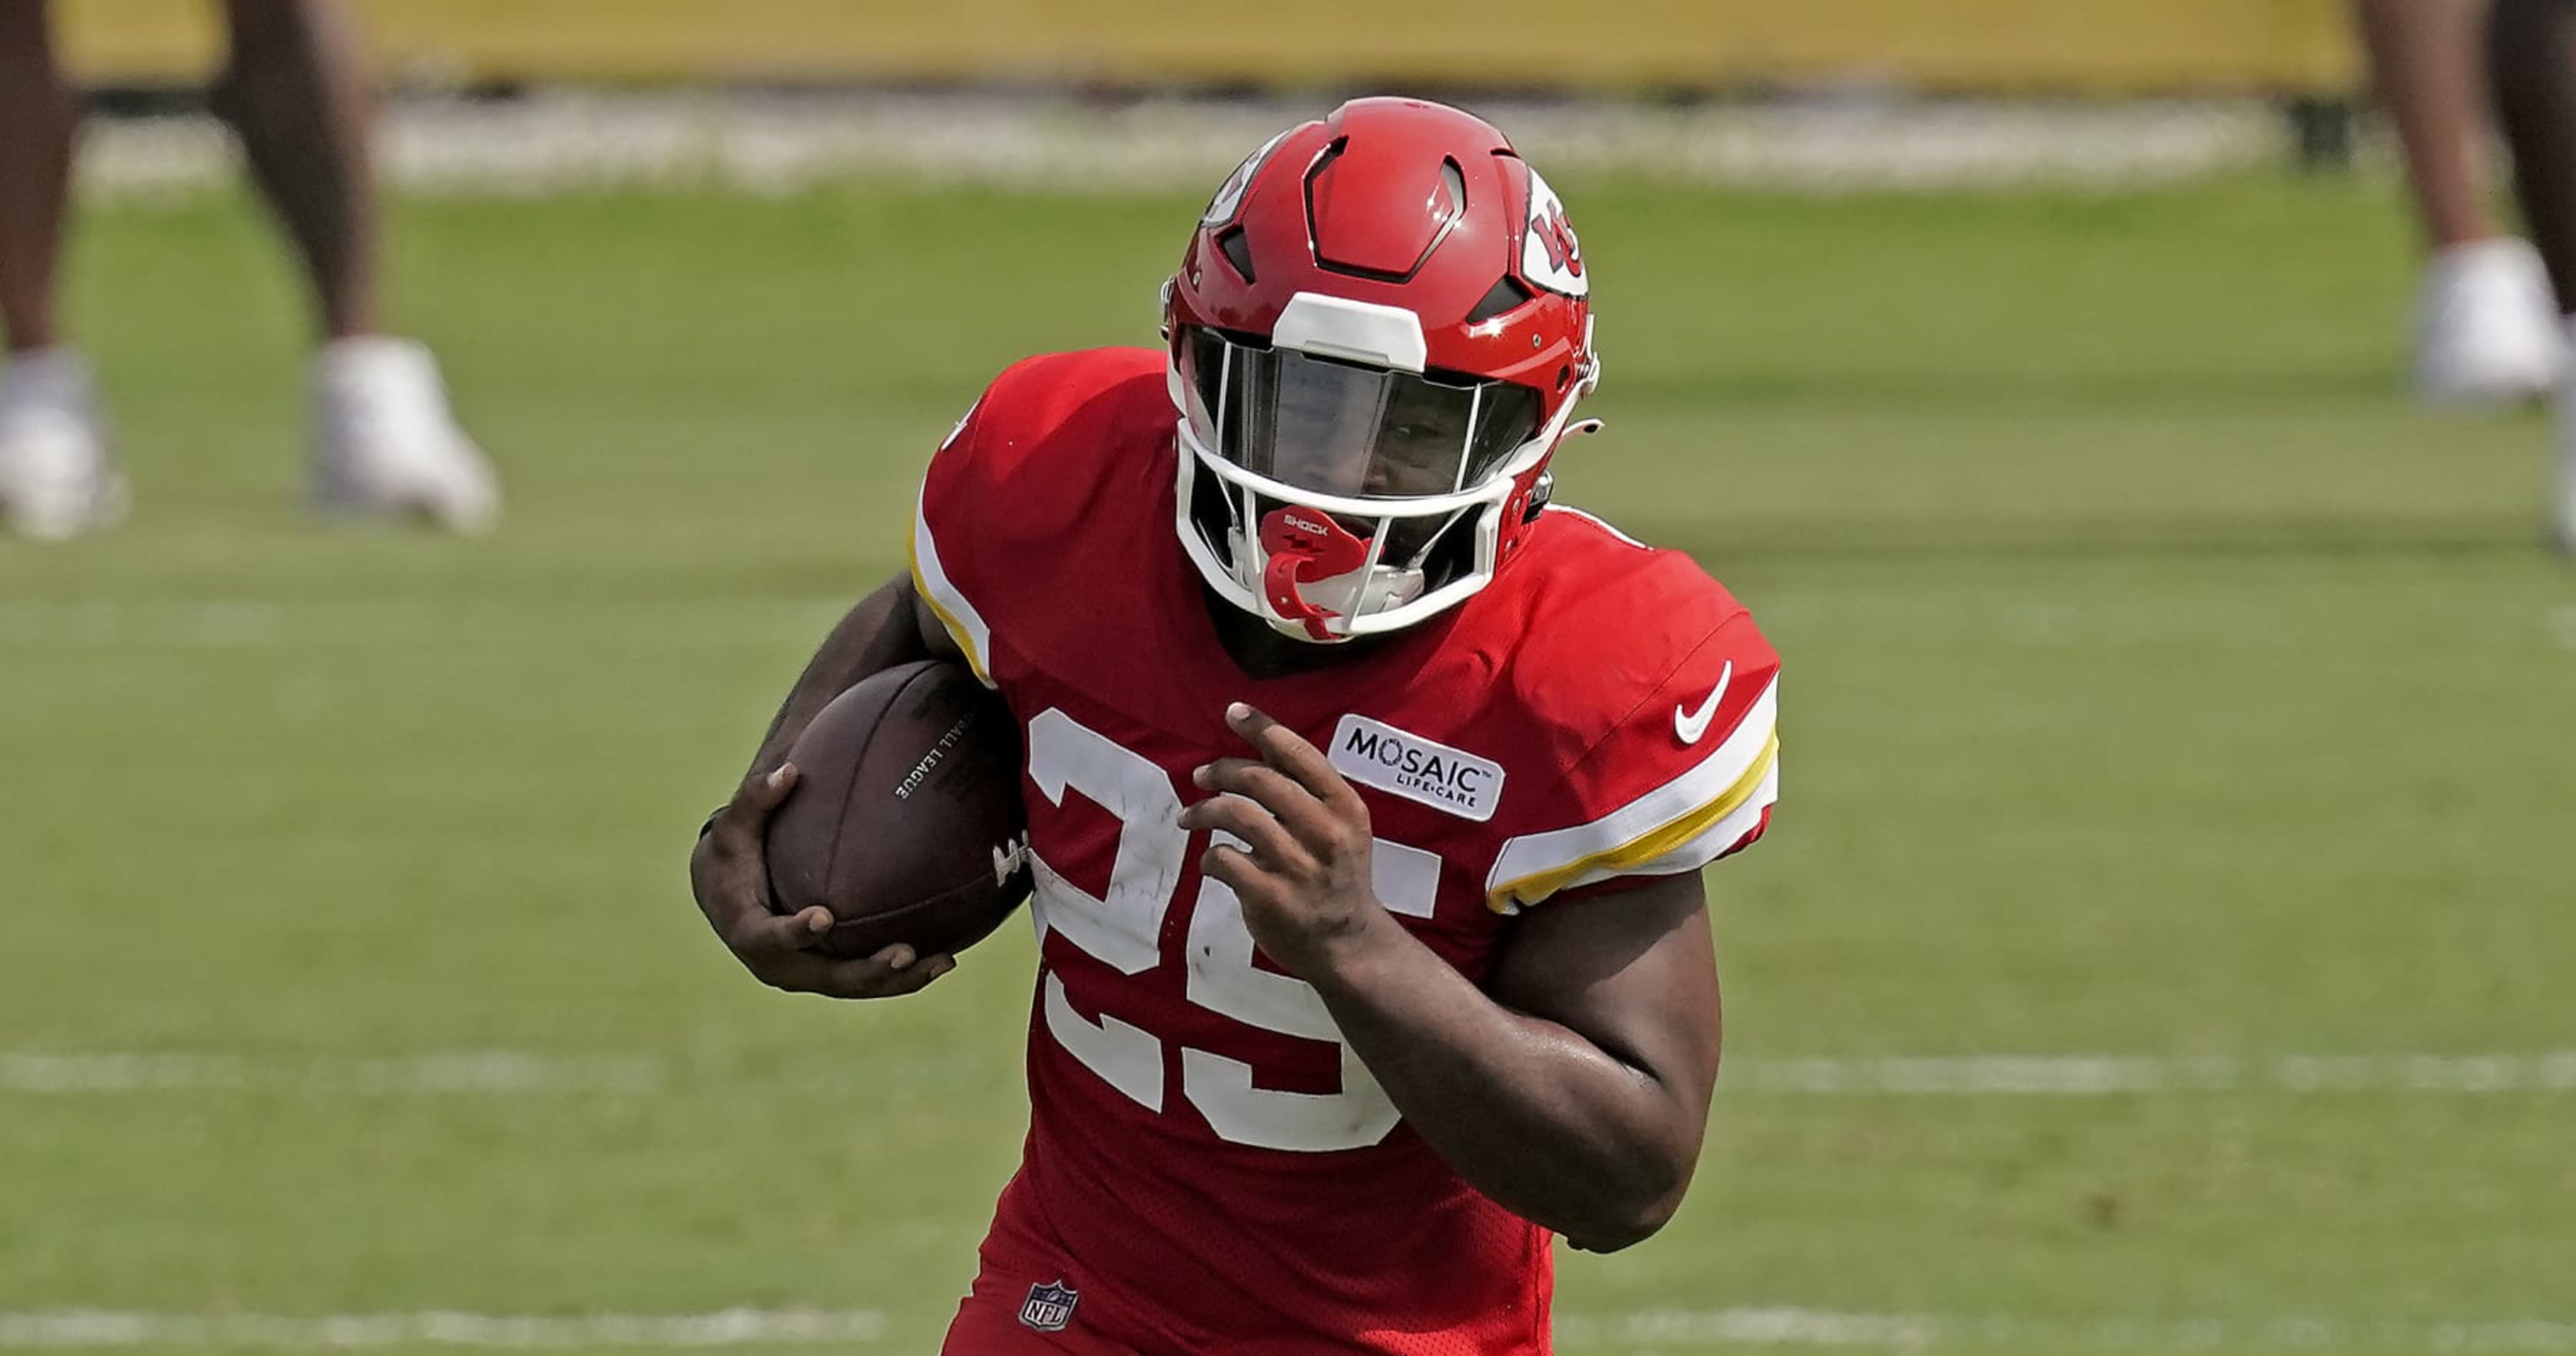 ESPN: ‘Don’t Be Surprised’ If Chiefs Keep 4 RBs Due to Clyde Edwards-Helaire Injuries